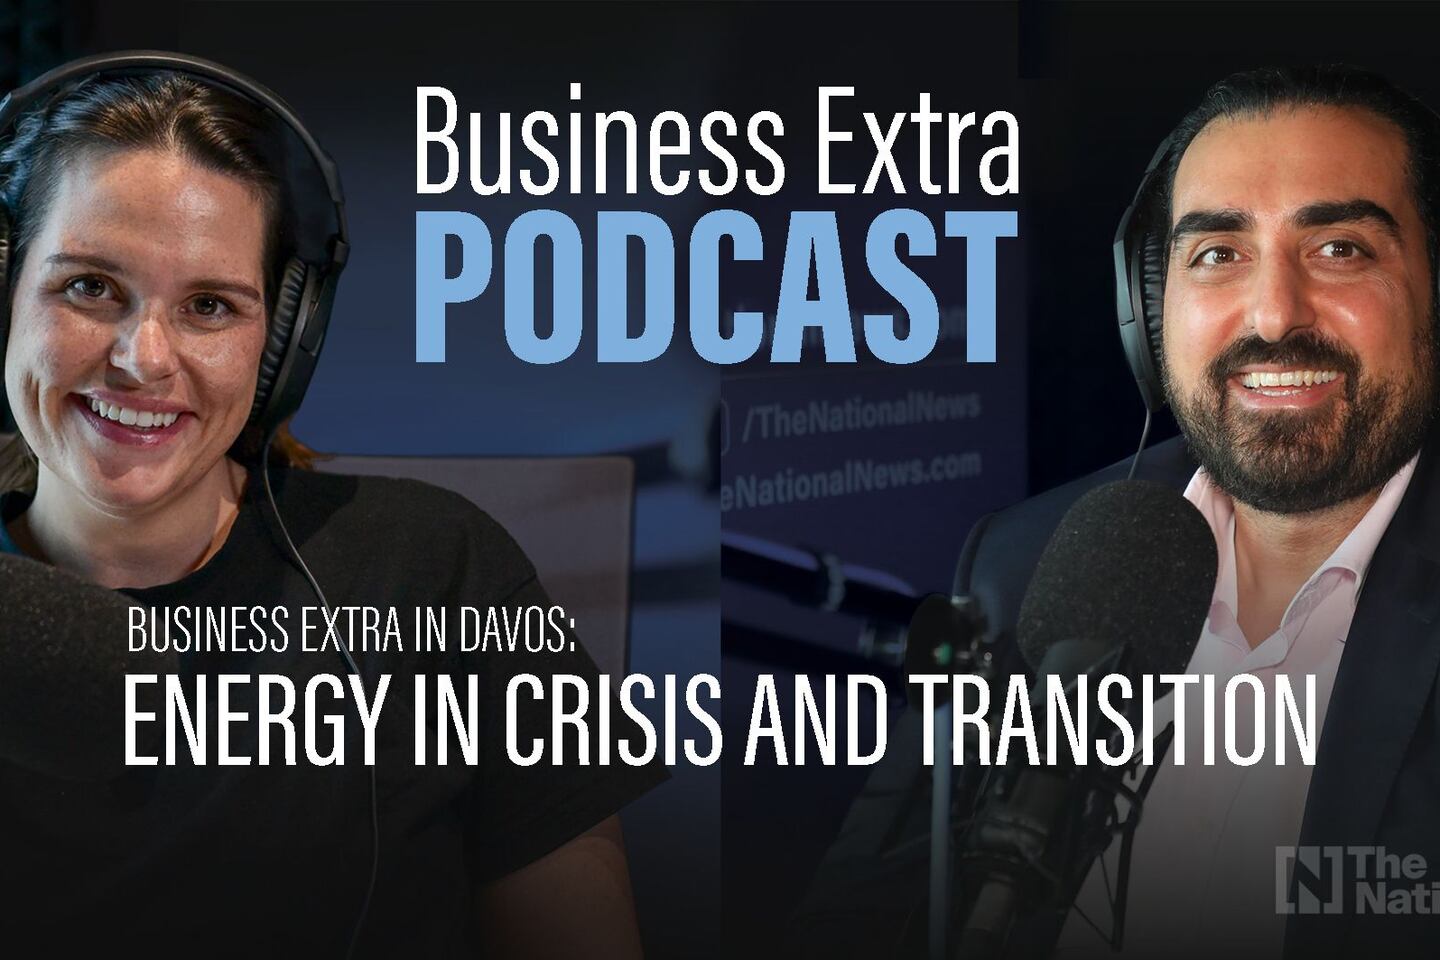 Business Extra in Davos: Energy in crisis and transition